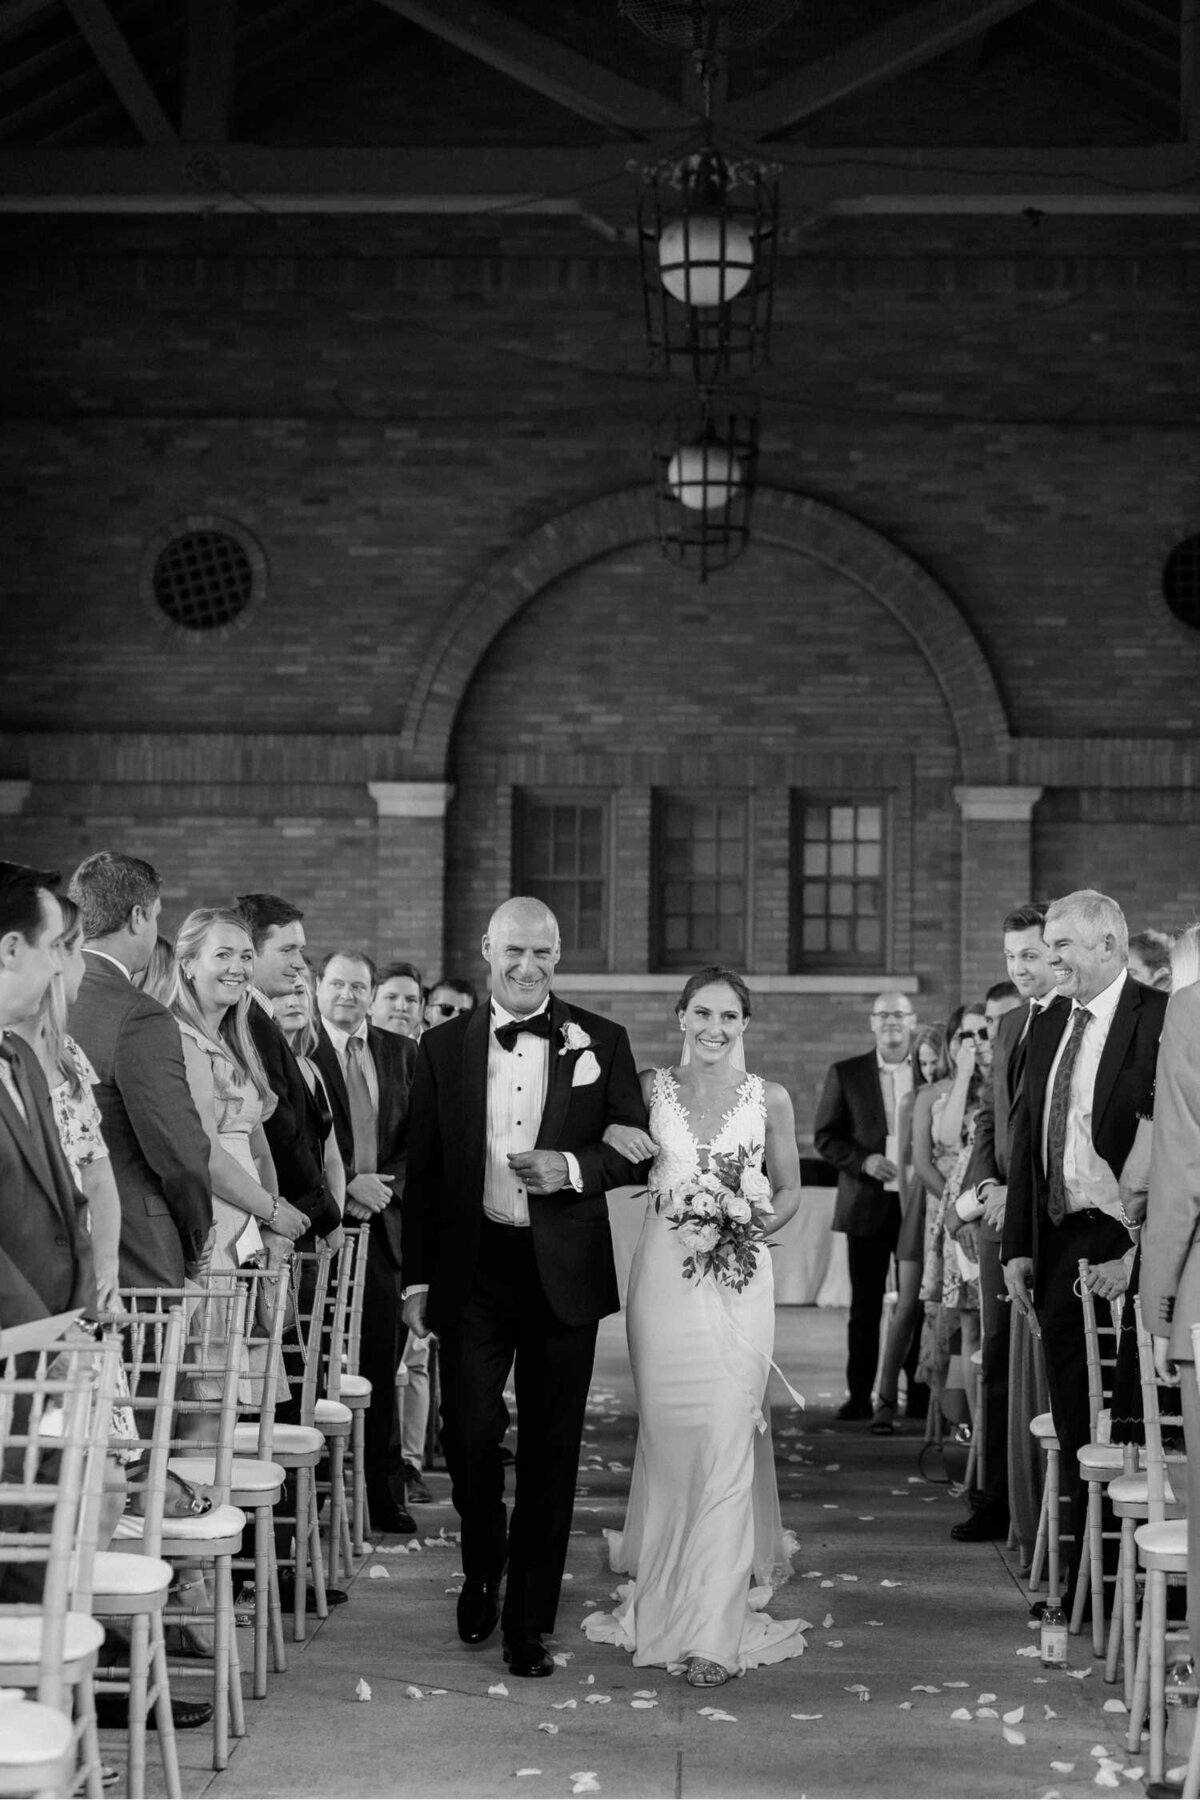 Father of the bride walking bride down the aisle at Columbus Park Refectory for a Luxury Chicago Outdoor Historic Wedding Venue.